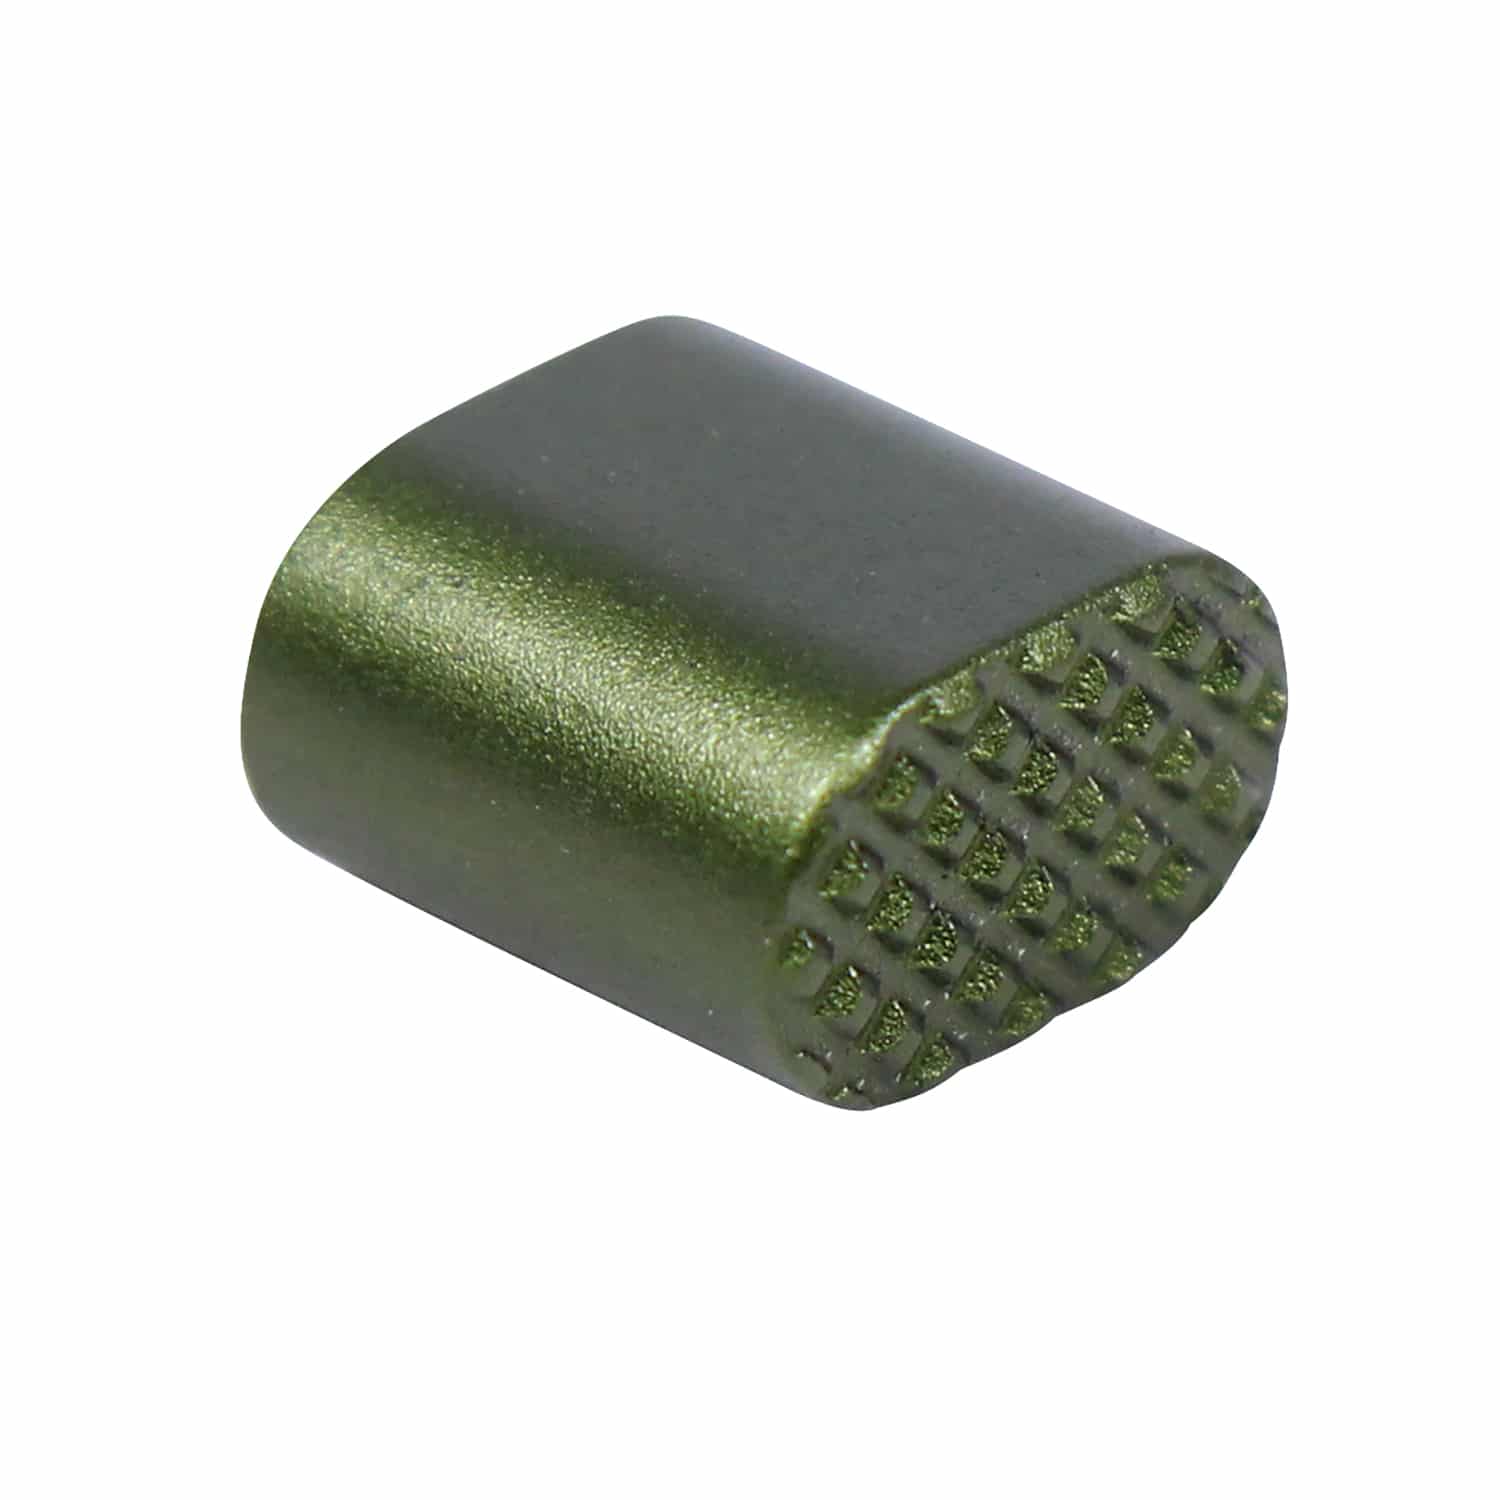 AR-15 Extended Magazine Release Button in Anodized Green